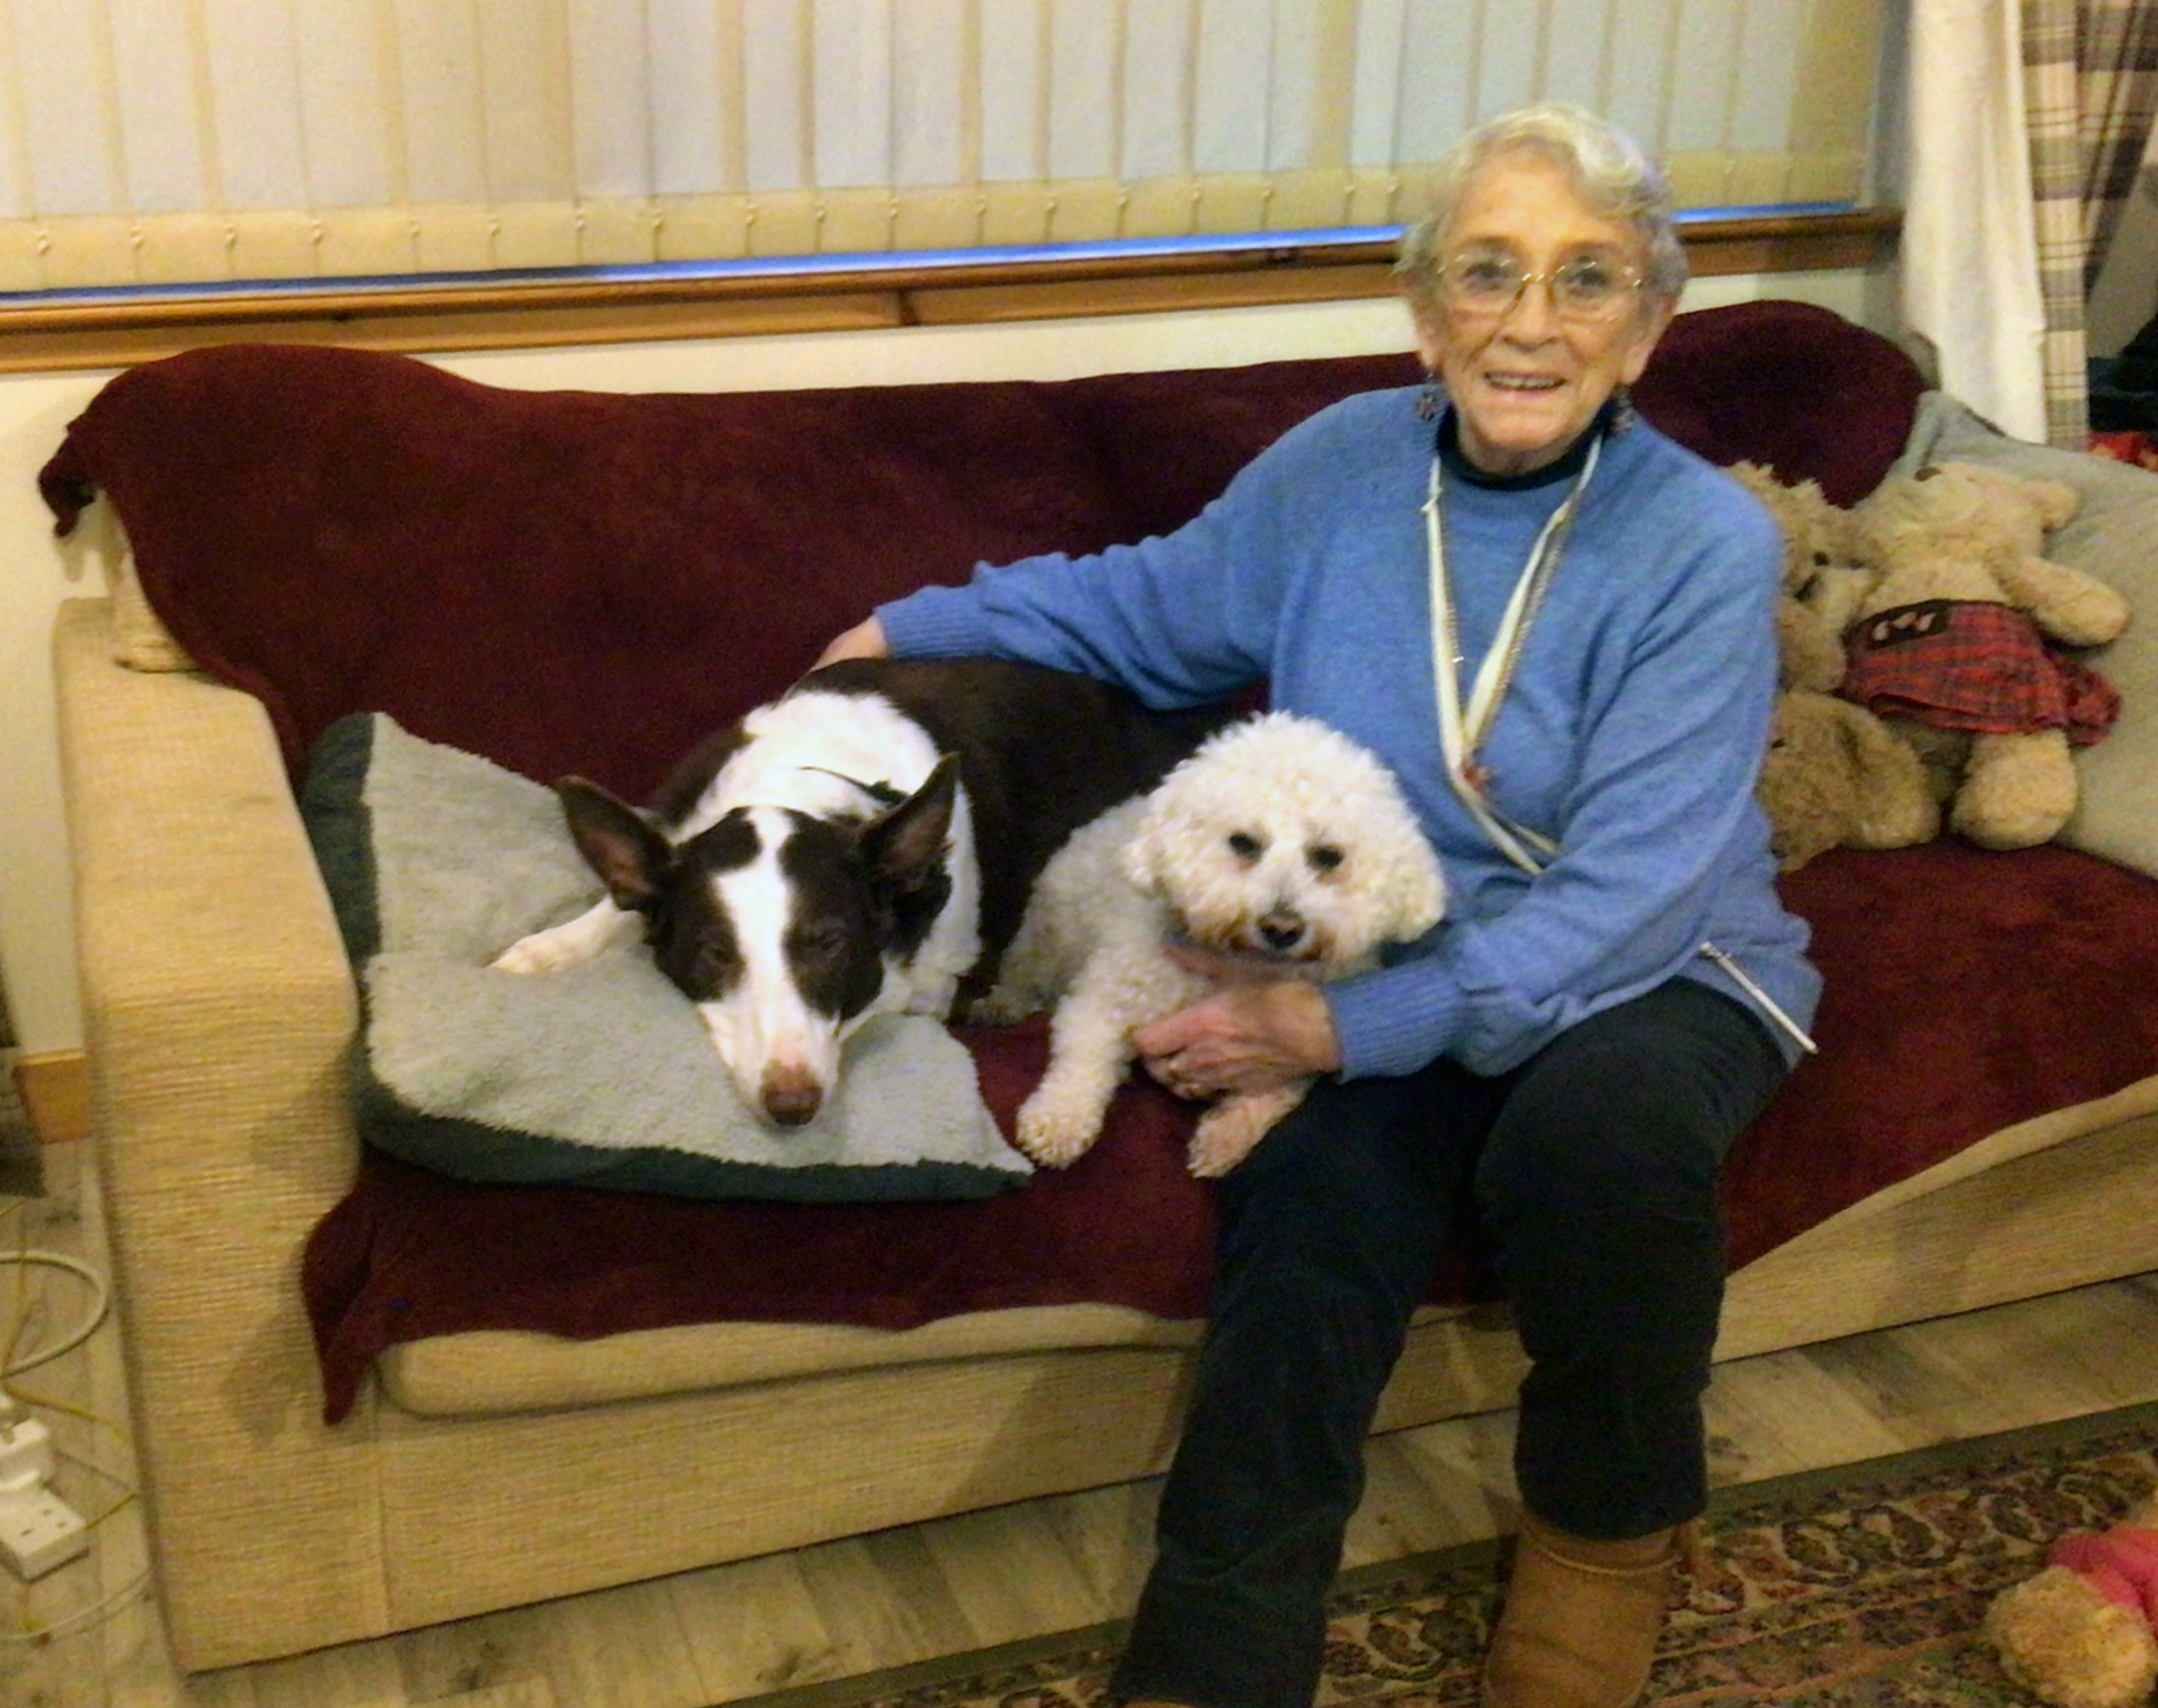 Edna, now 82, seated on a couch with her dogs Zannusi, a black and white short-haired dog, and Missy, a small white dog with curly hair.